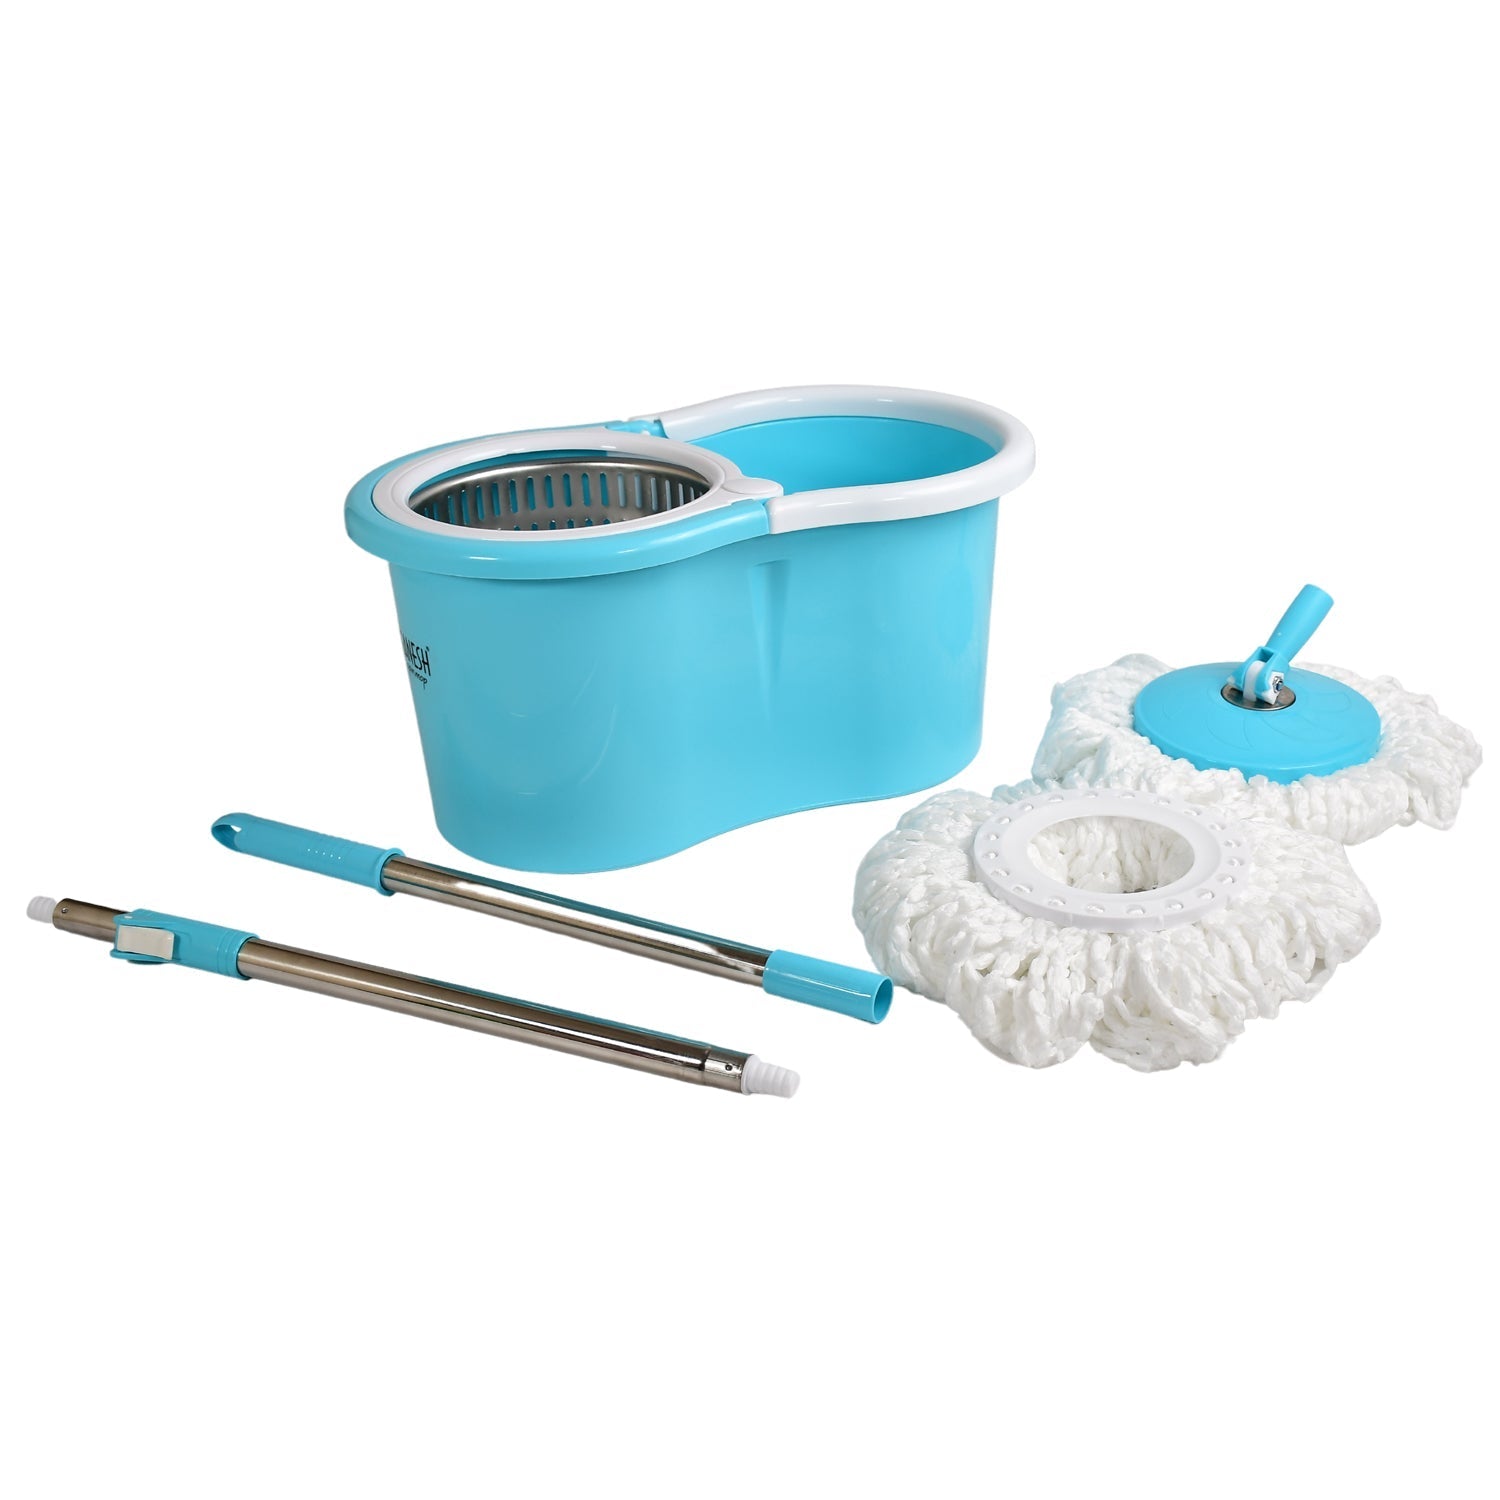 8714 RAPID STEEL SPINNER BUCKET MOP 360 DEGREE SELF SPIN WRINGING WITH 2 ABSORBERS FOR HOME AND OFFICE FLOOR CLEANING MOPS SET DeoDap